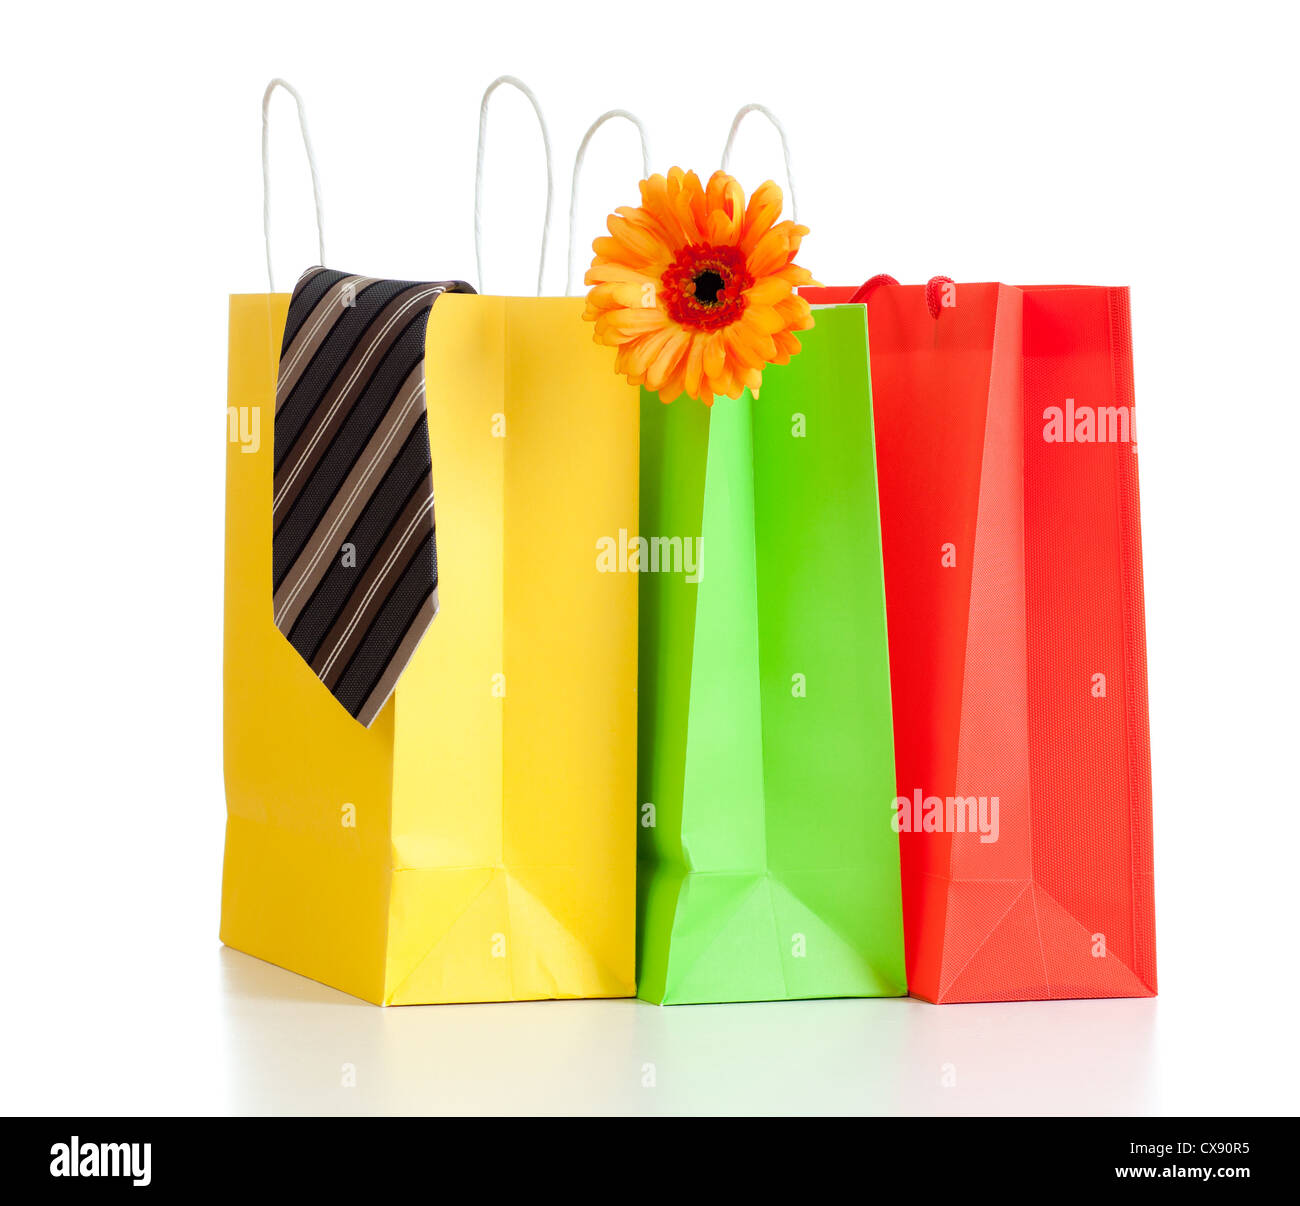 shopping bags with purchases for family on white background with reflection Stock Photo